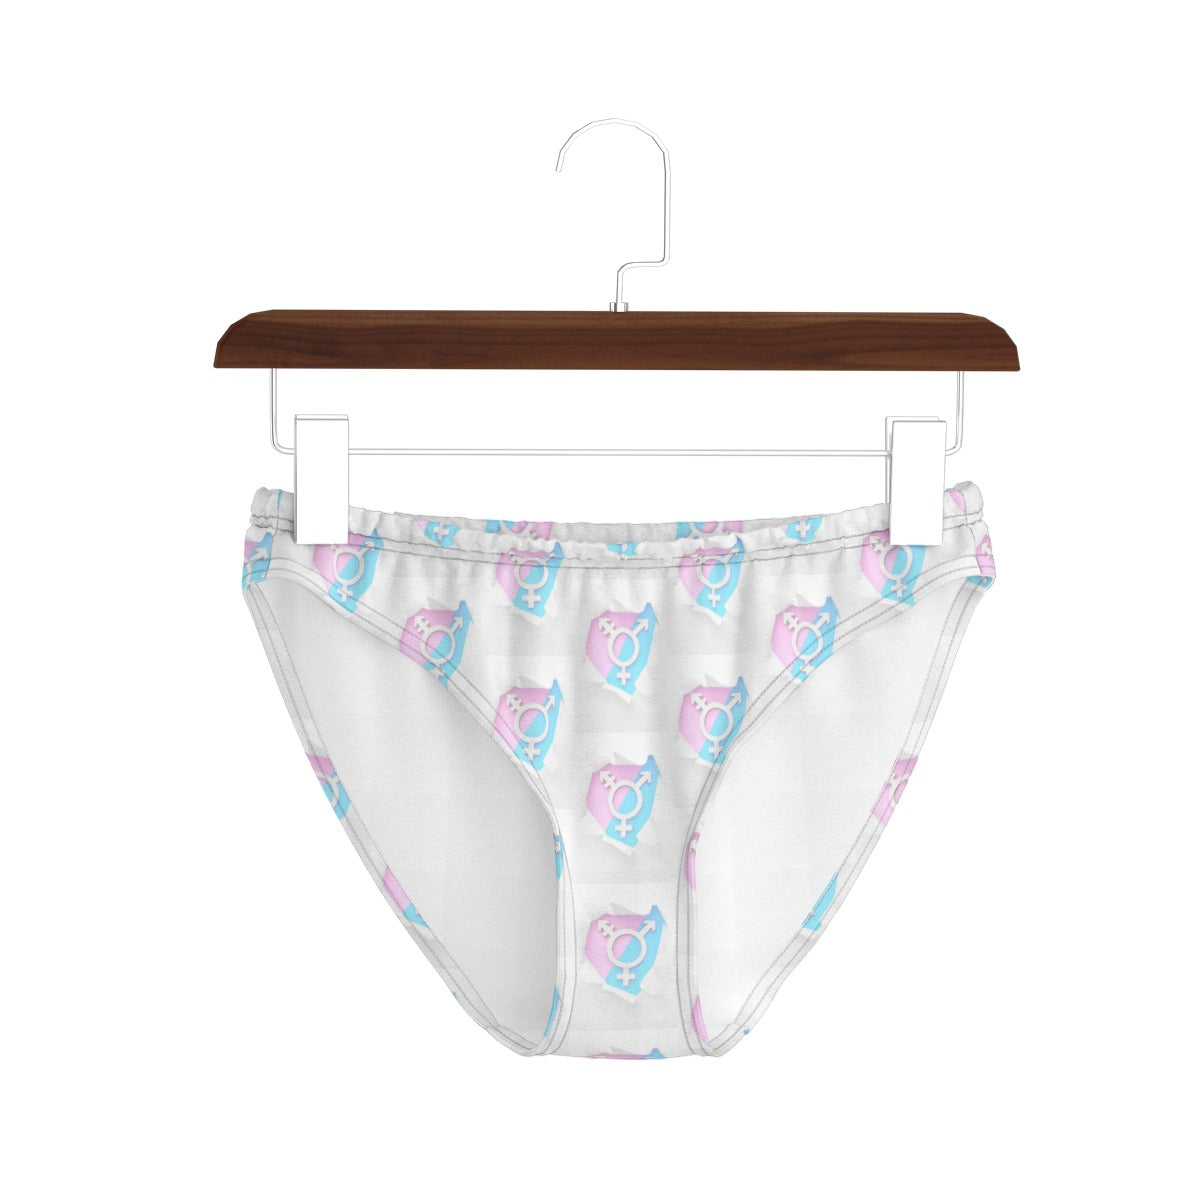 Plus Size All-Over Print Blue Pink White Knickers